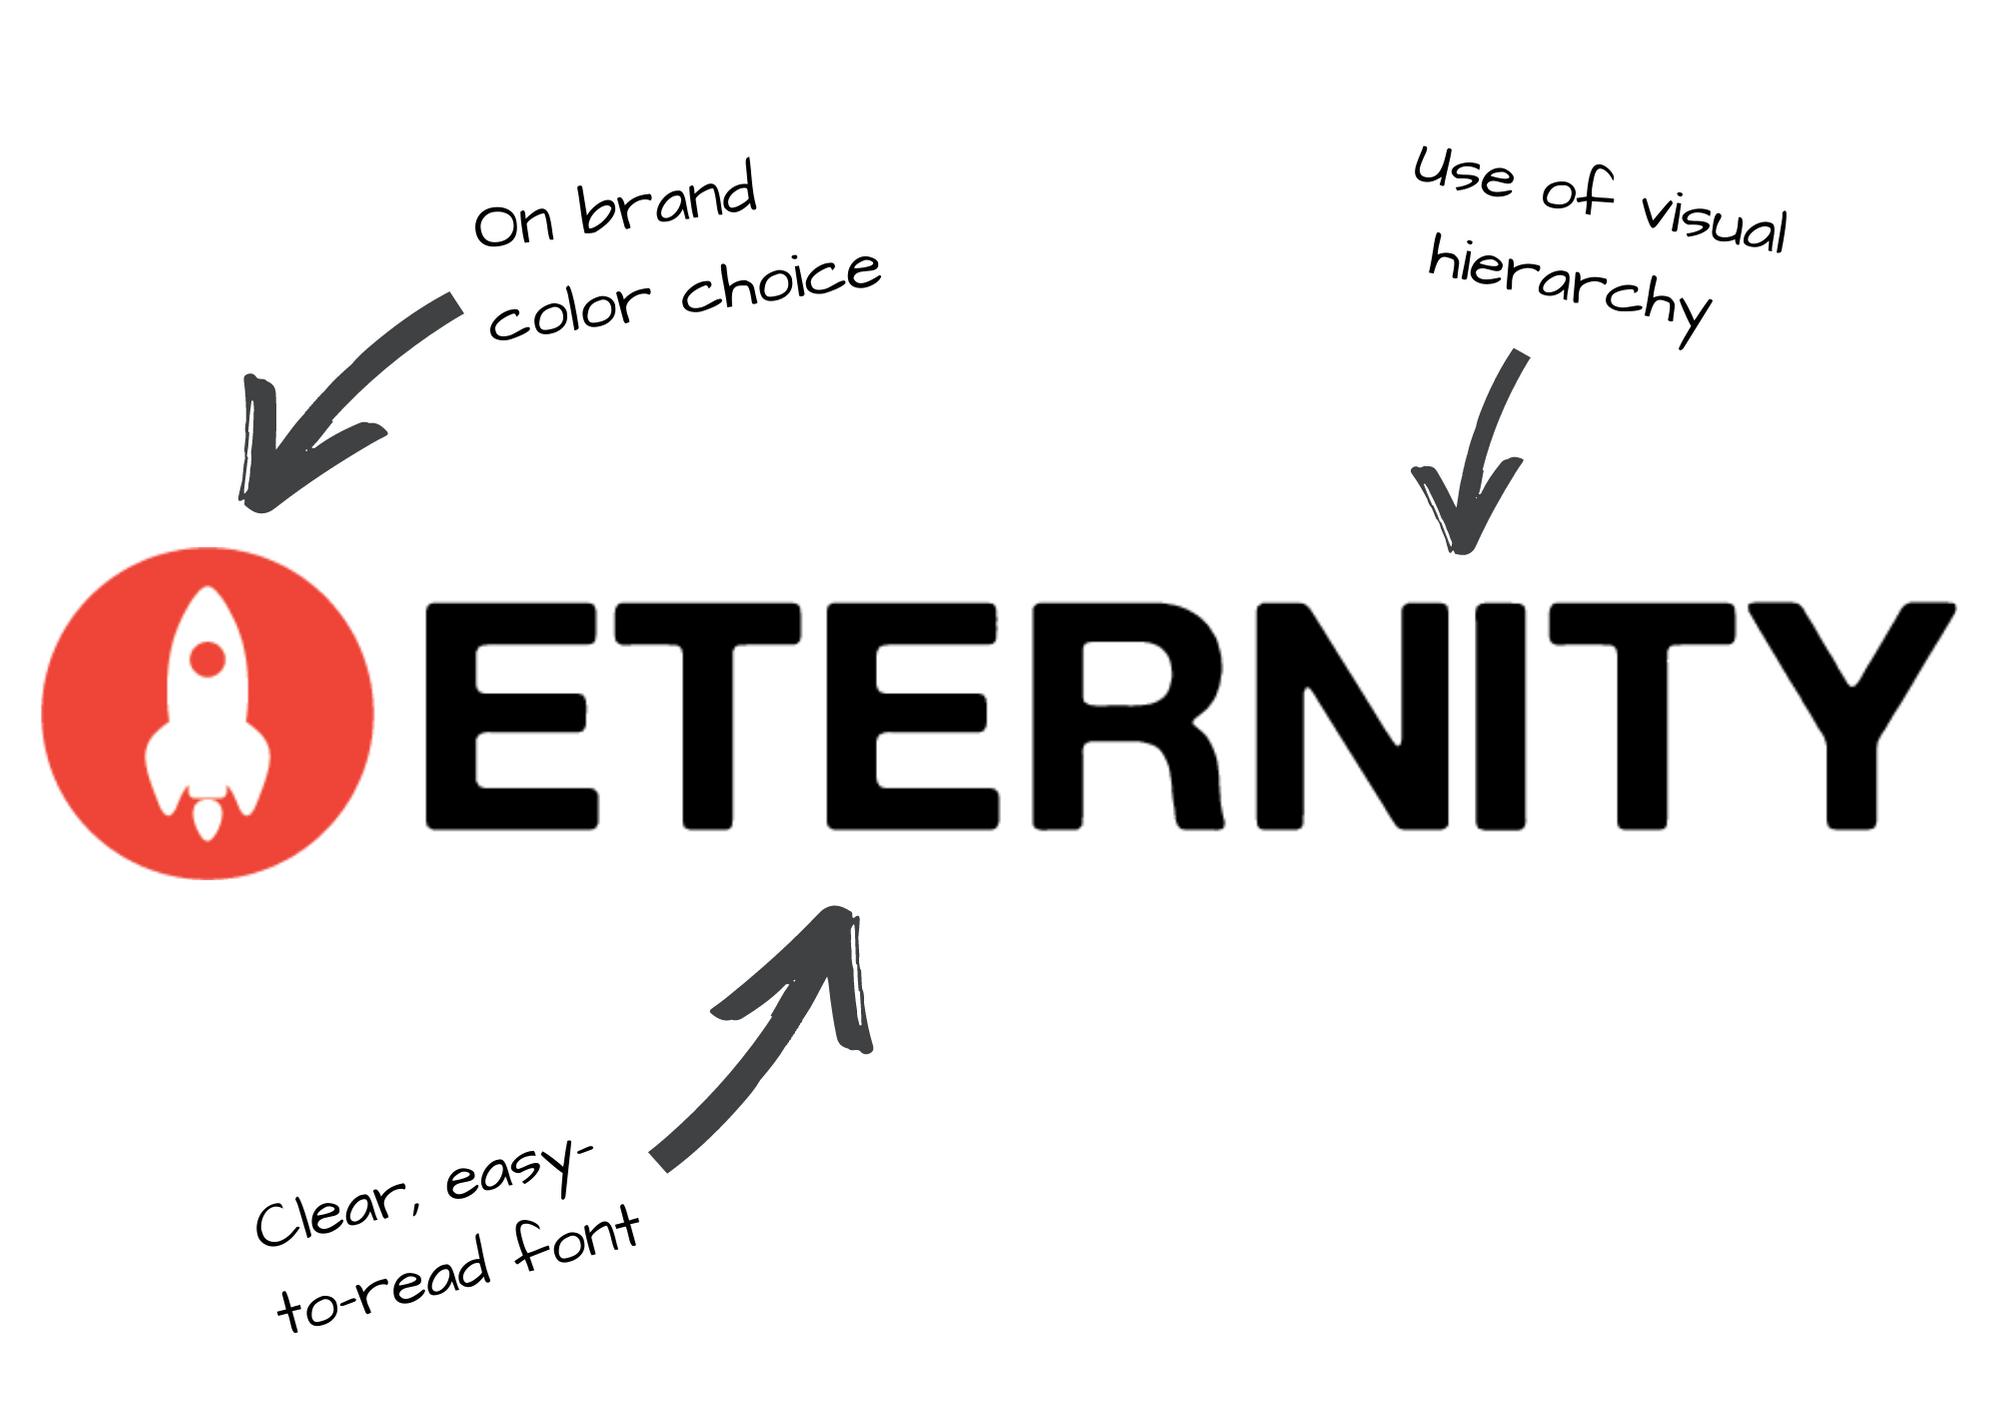 Eternity logo labeled with on-brand color choice, visual hierarchy, and clear easy-to-read font